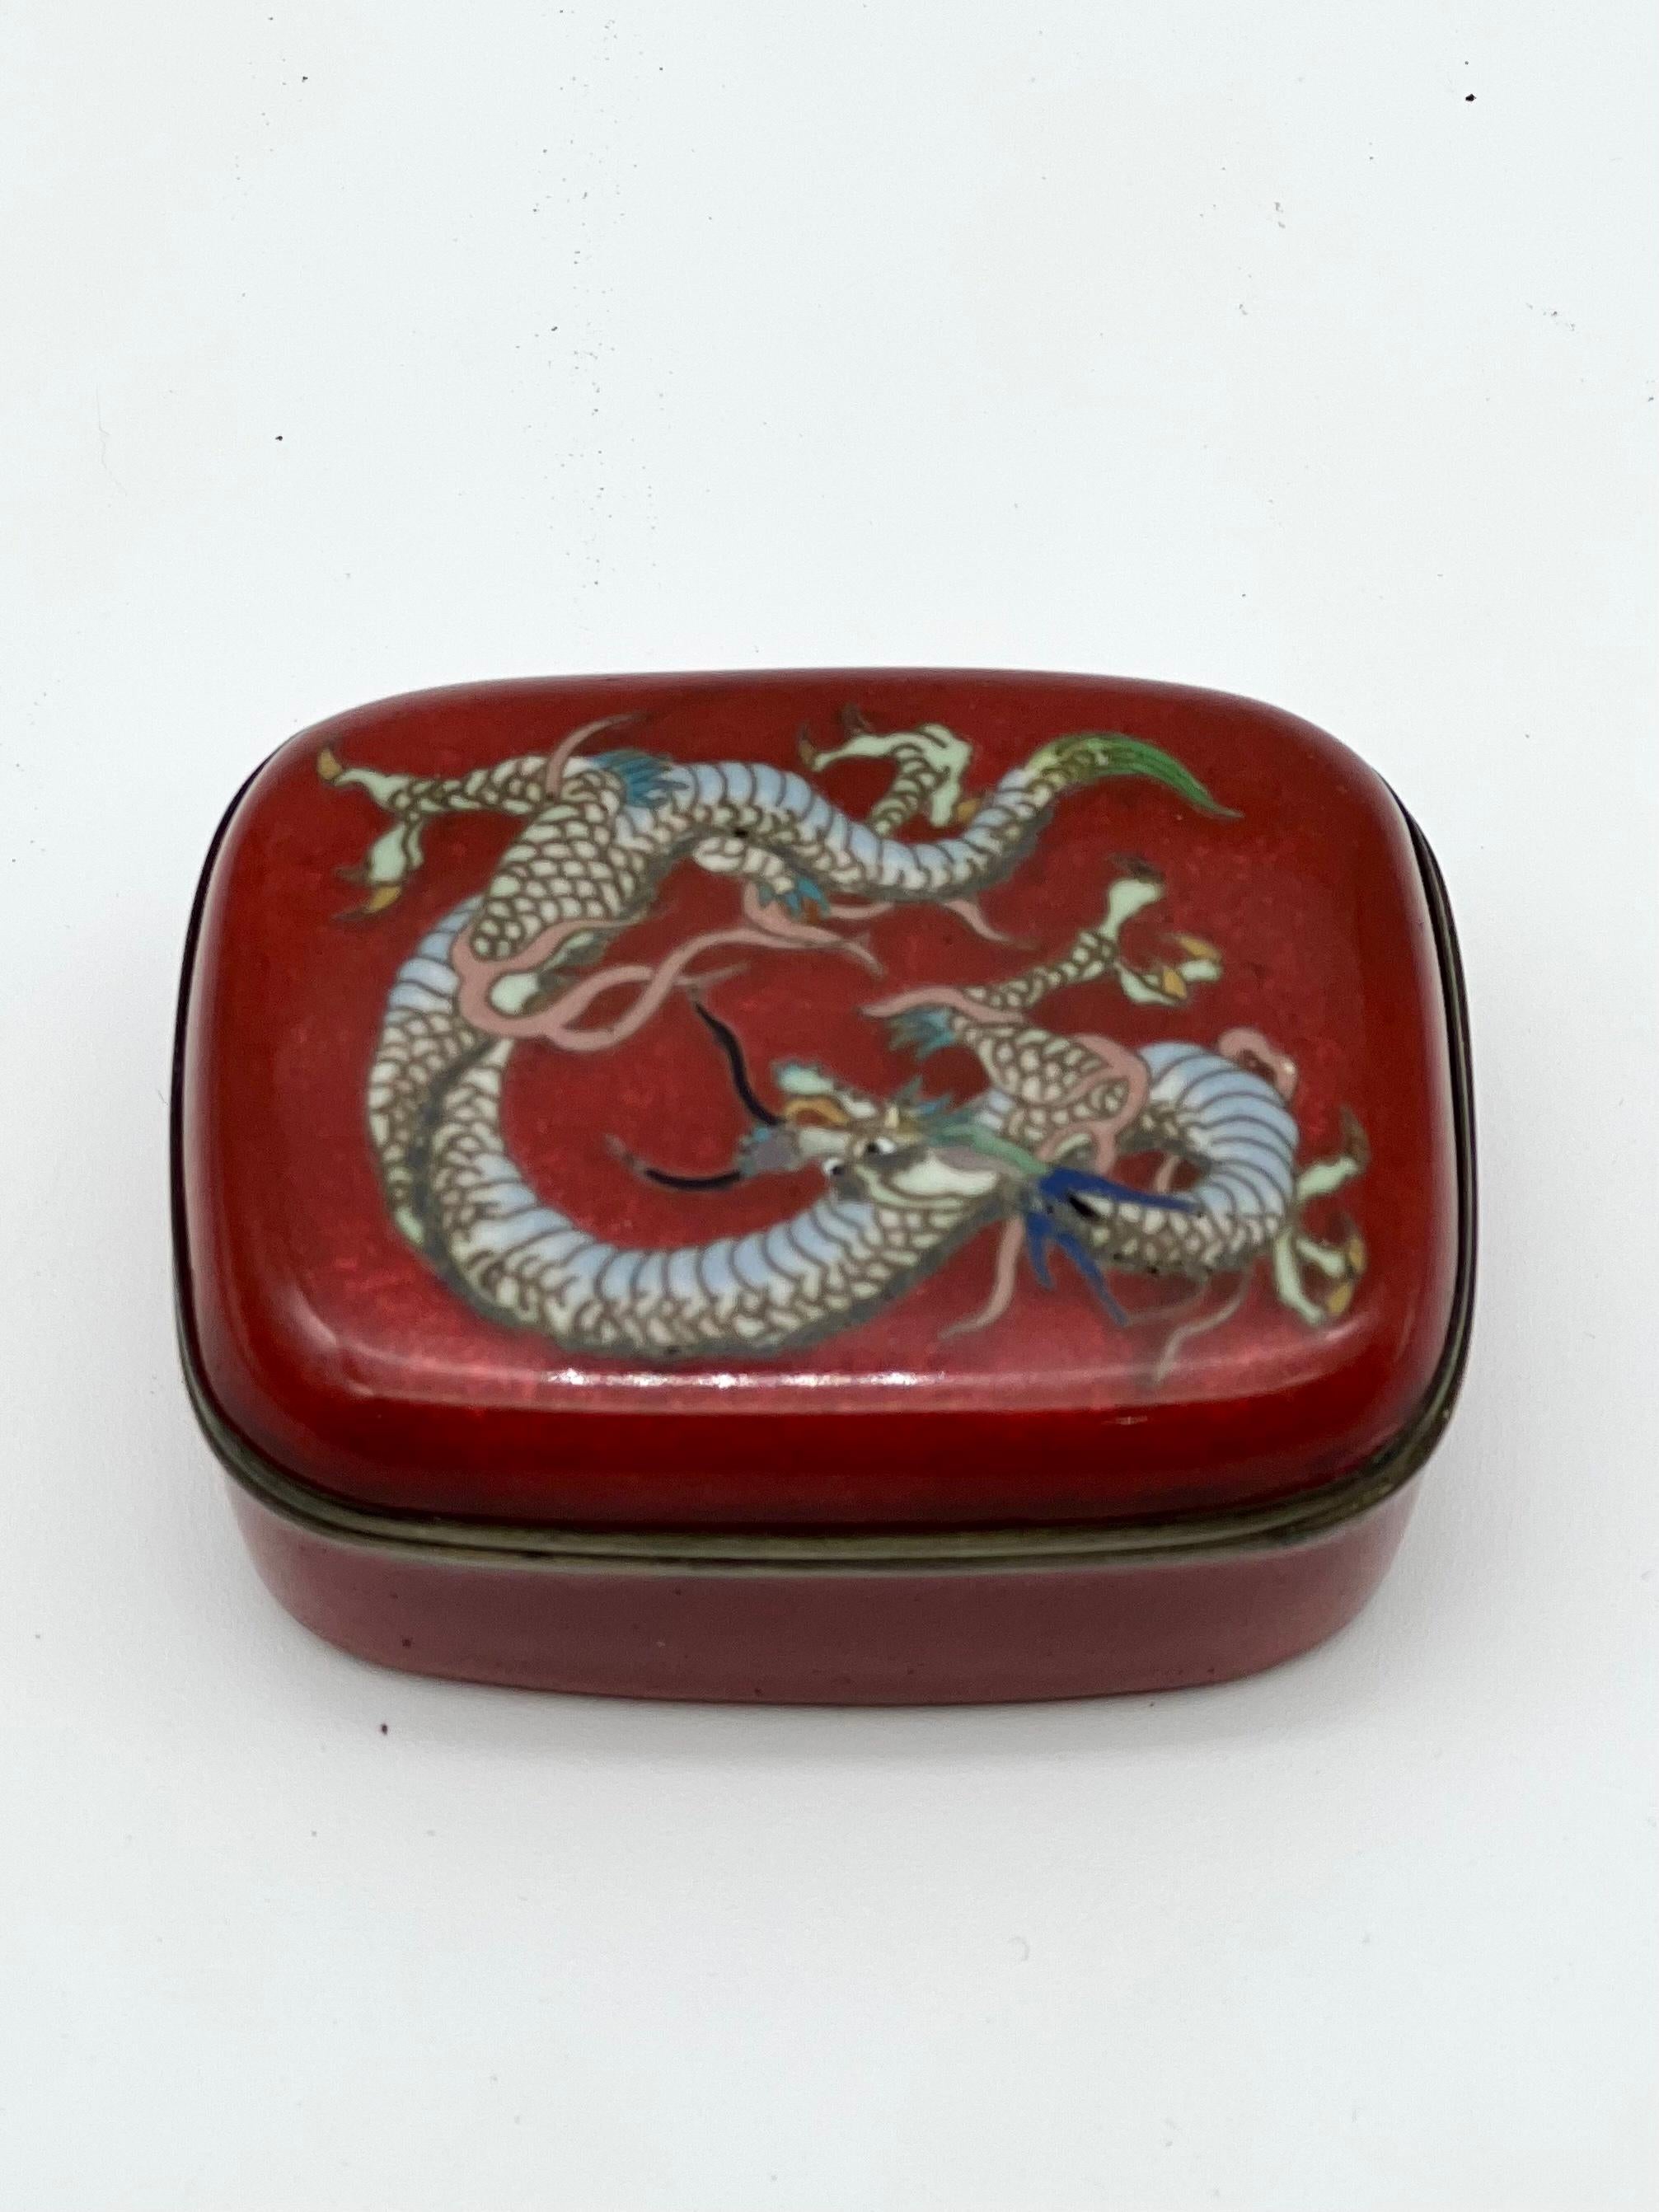 Exquisite Japanese Cloisonne Enamel Box and Cover. 19th C For Sale 9